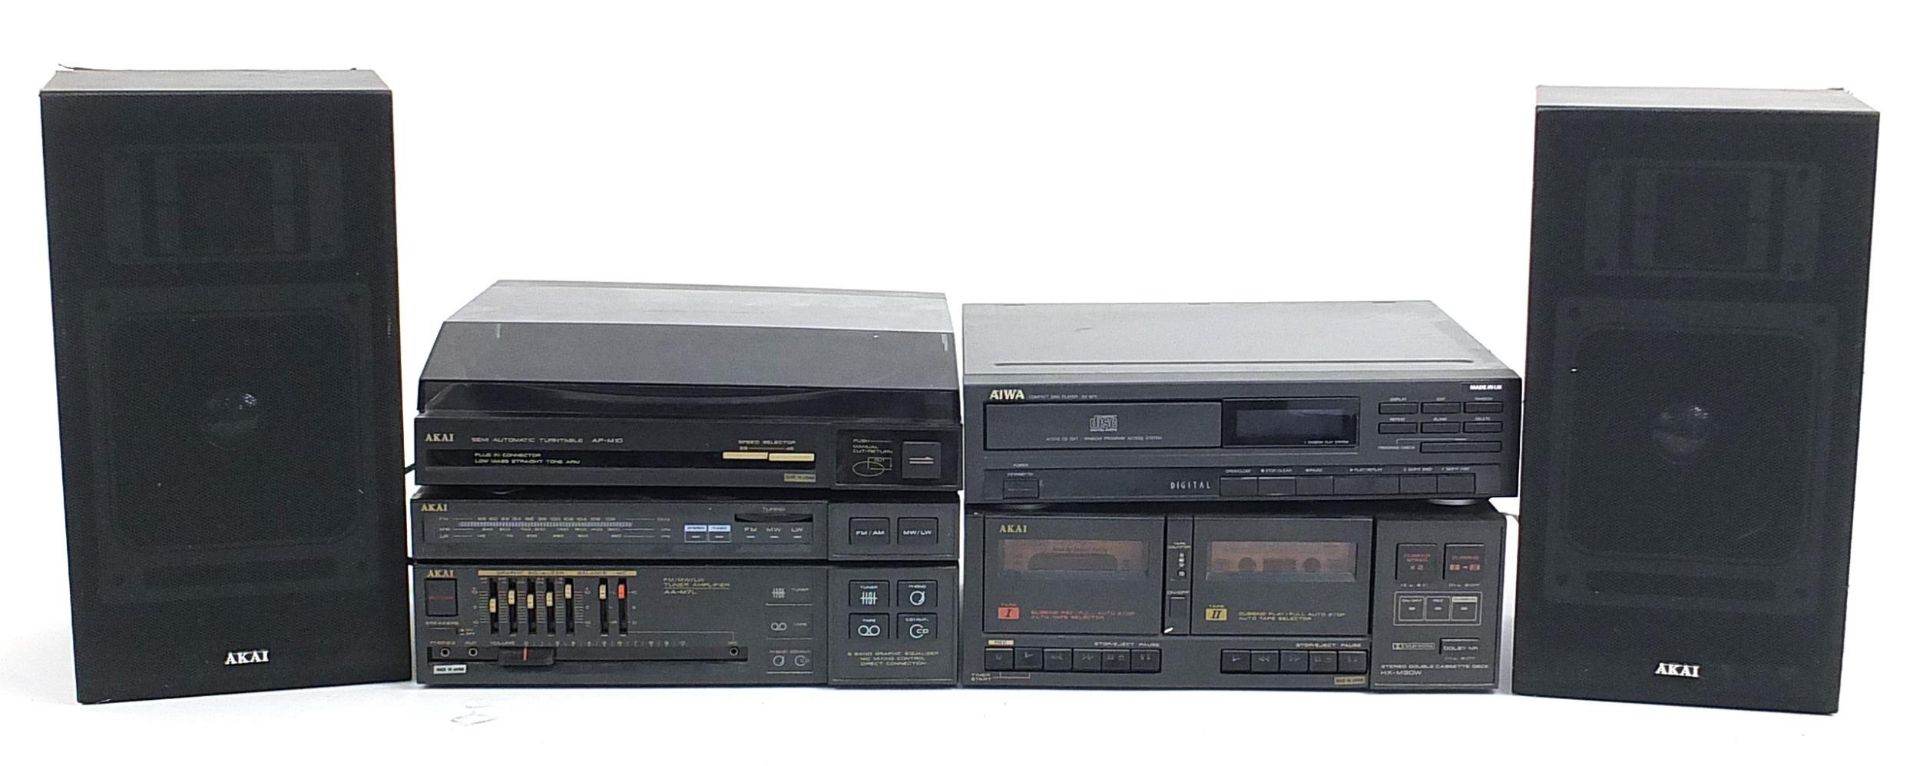 Akai stereo system including seperate cassette recorder, tuner, radio record deck and Aiwa digital